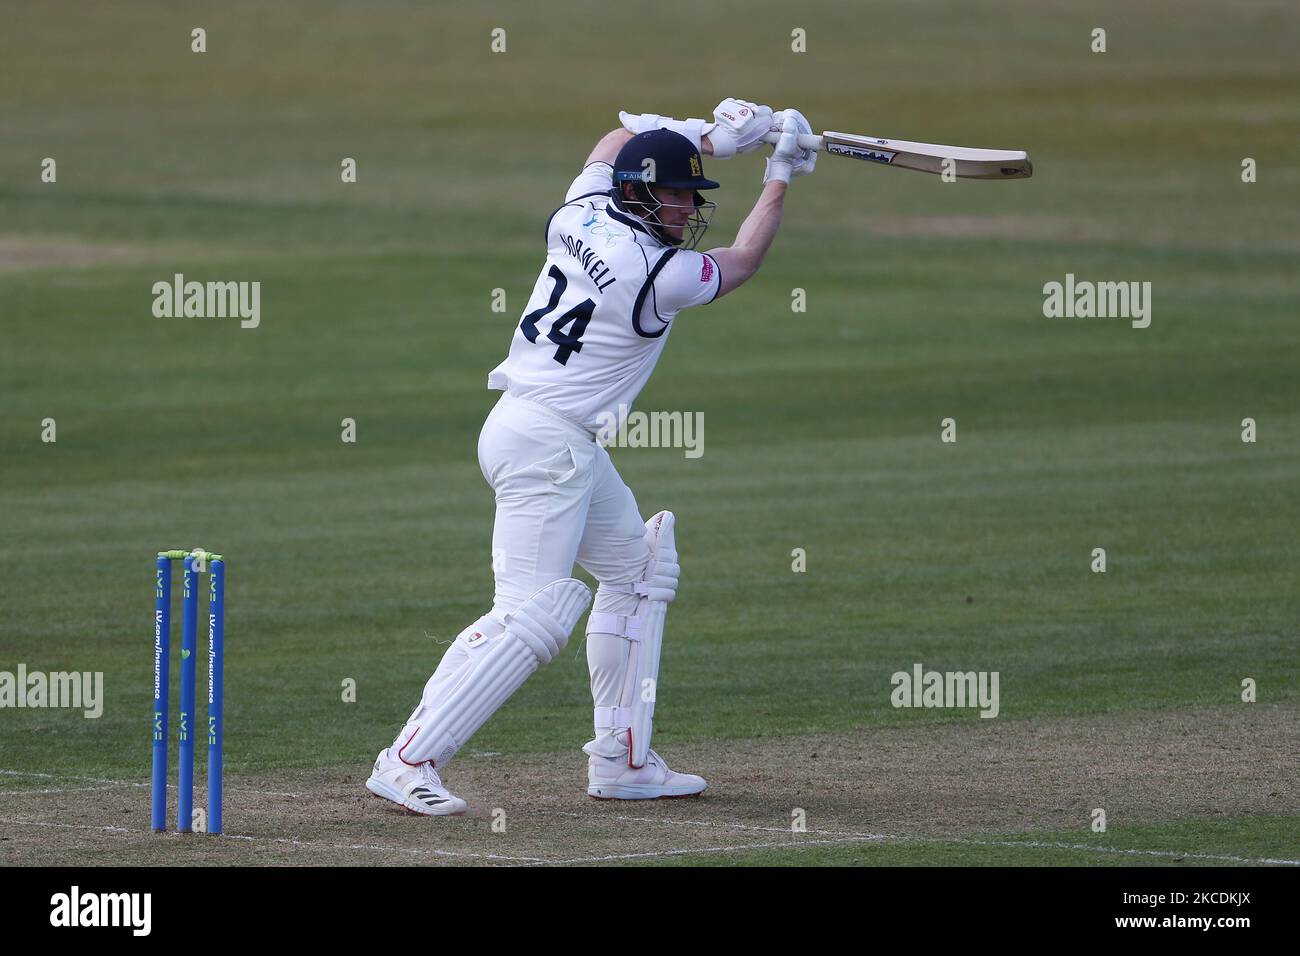 Liam Norwell of Warwickshire batting during the LV= County Championship match between Durham County Cricket Club and Warwickshire County Cricket Club at Emirates Riverside, Chester le Street, UK on 29th April 2021. (Photo by Mark Fletcher/MI News/NurPhoto) Stock Photo